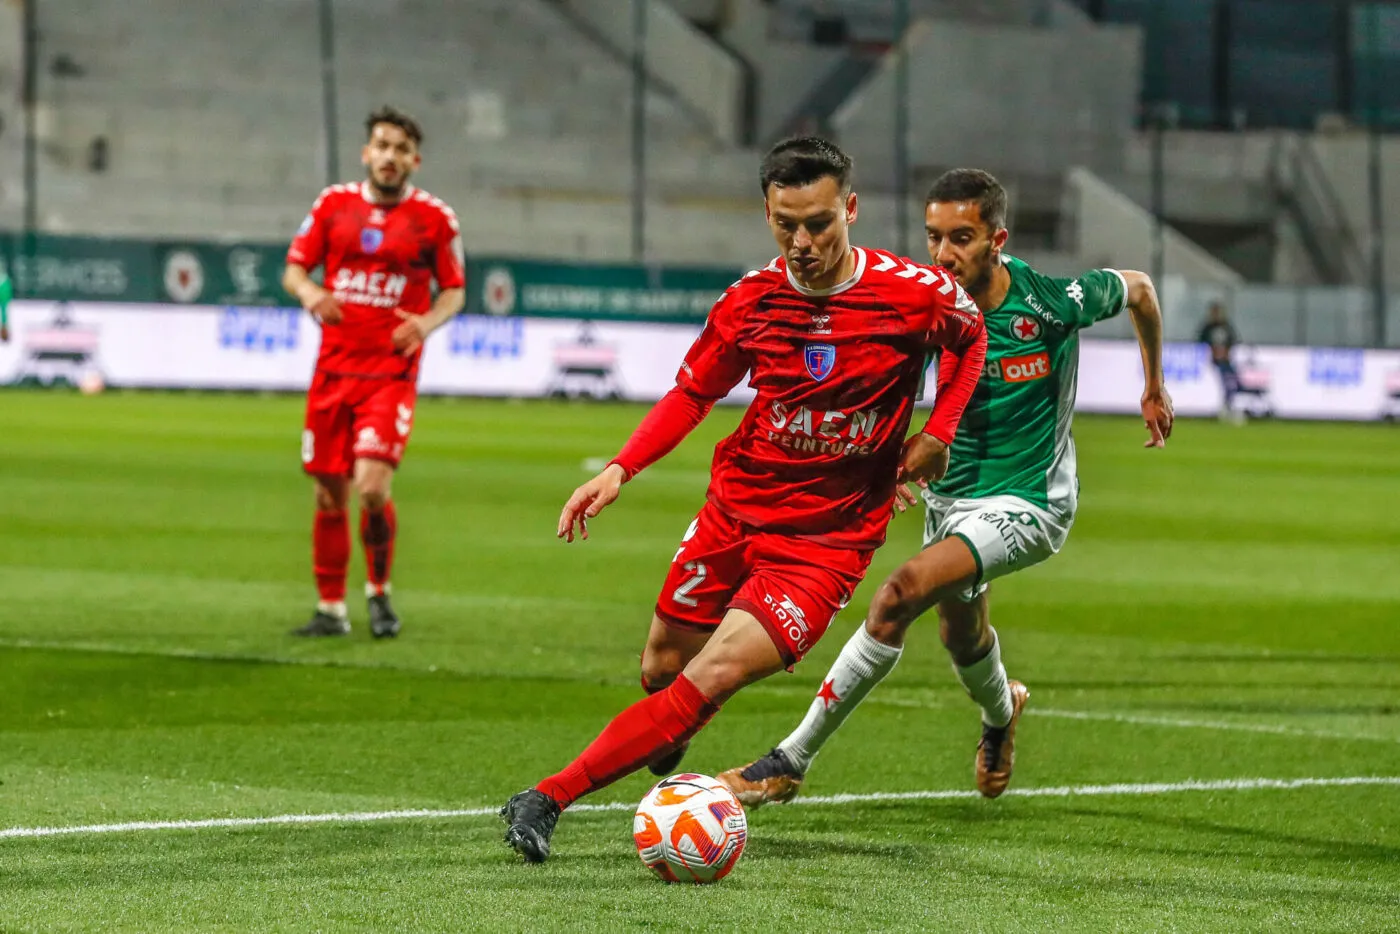 Alec GEORGEN of US Concarneau during the National 1 match between Red Star FC and US Concarneau on April 7, 2023 at Bauer stadium in Saint Ouen l'Aumone, France.